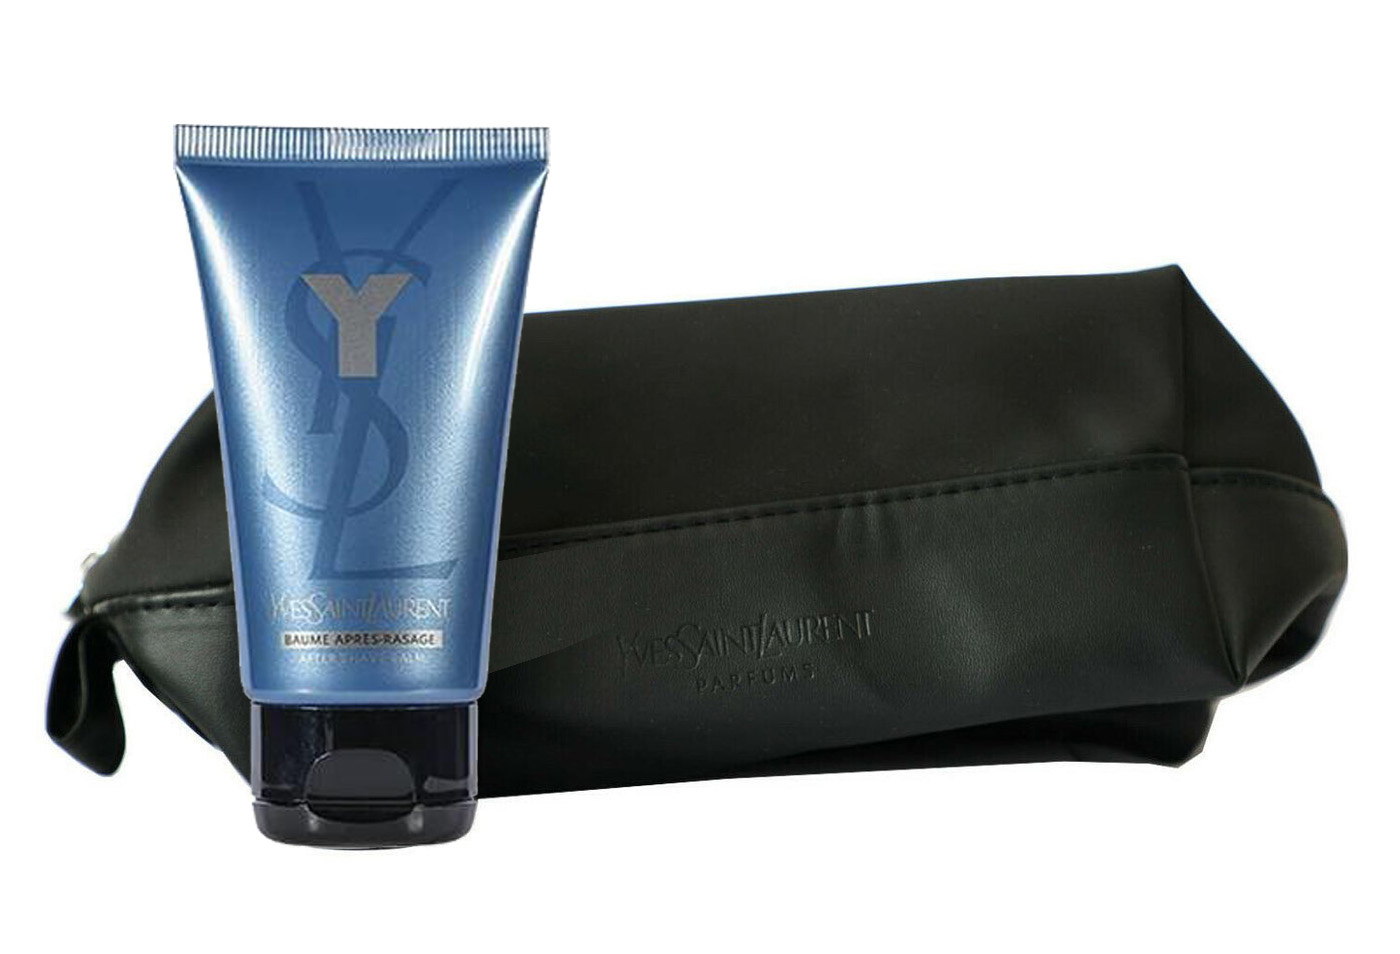 Yves St. Laurent After Shave Balm 50ml and Original Black Toiletry Bag